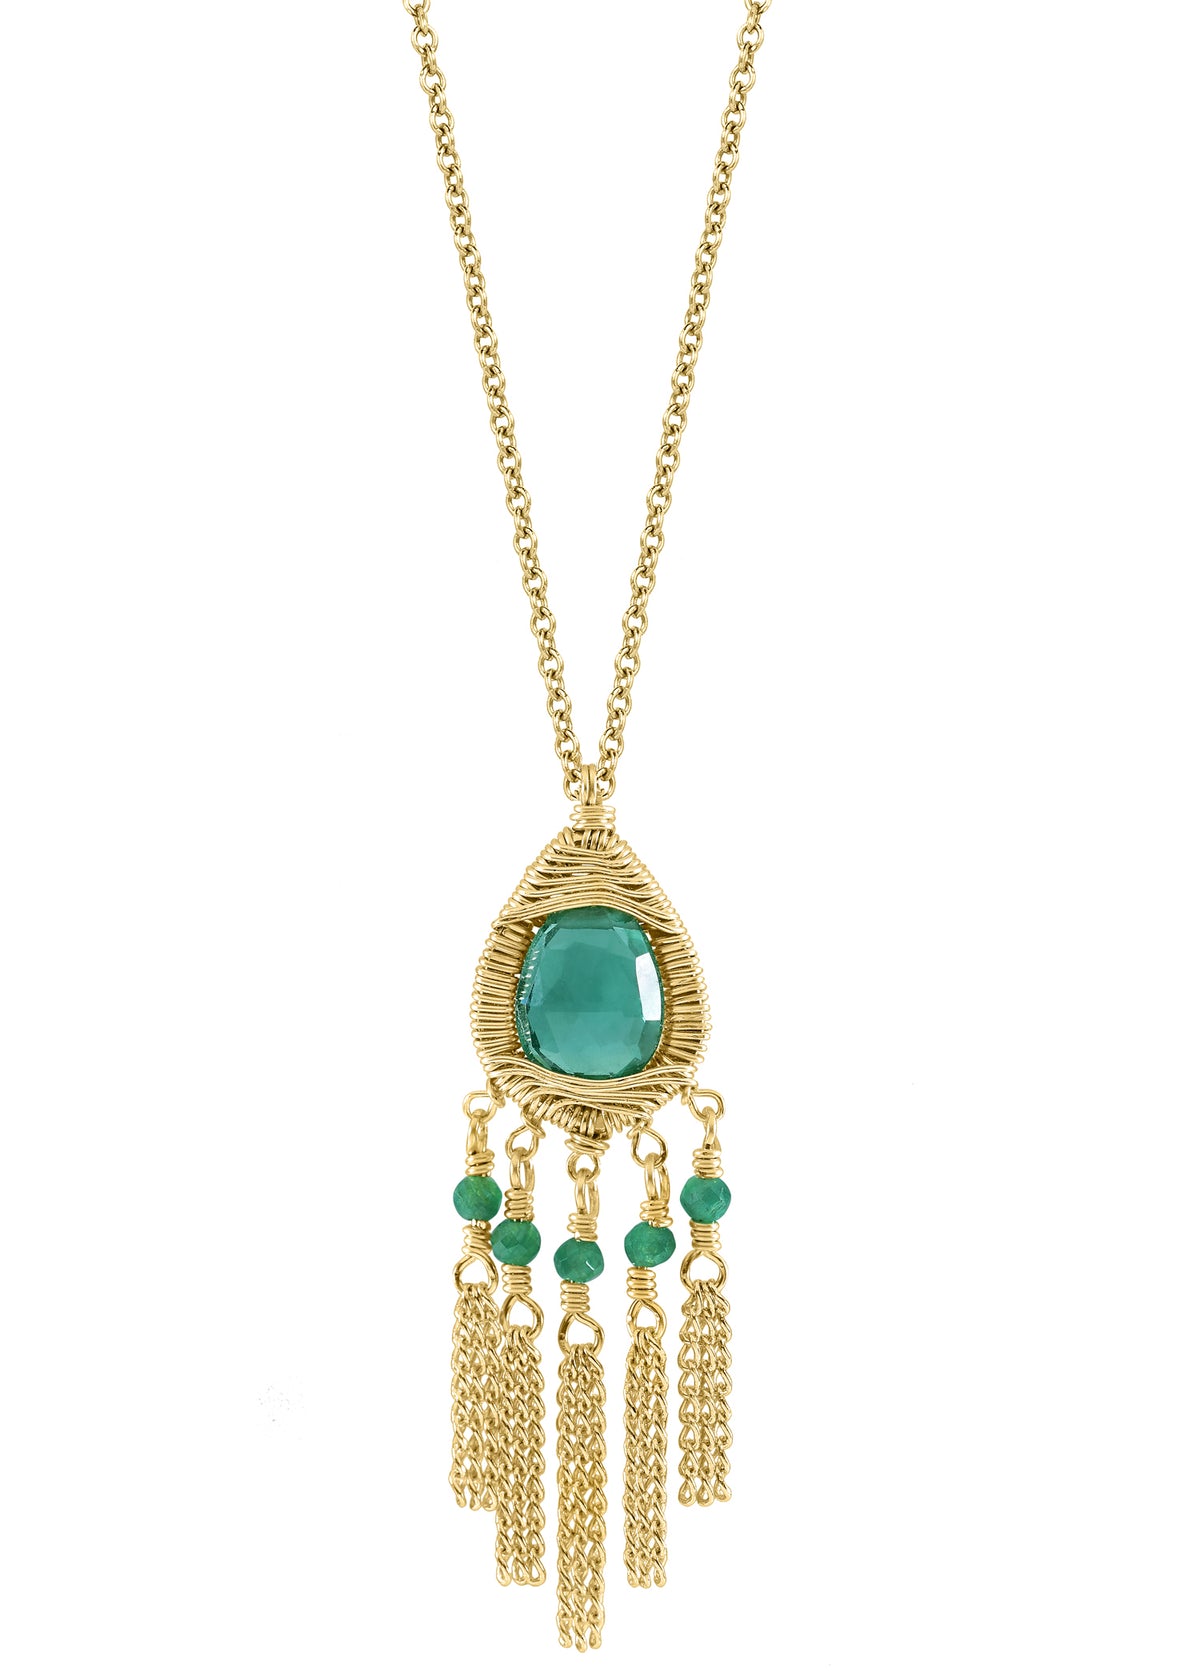 Emerald Green quartz 14k gold fill Necklace measures 17&quot; in length Pendant measures 1-1/4&quot; in length and 1/2&quot; in width at the widest point Handmade in our Los Angeles studio